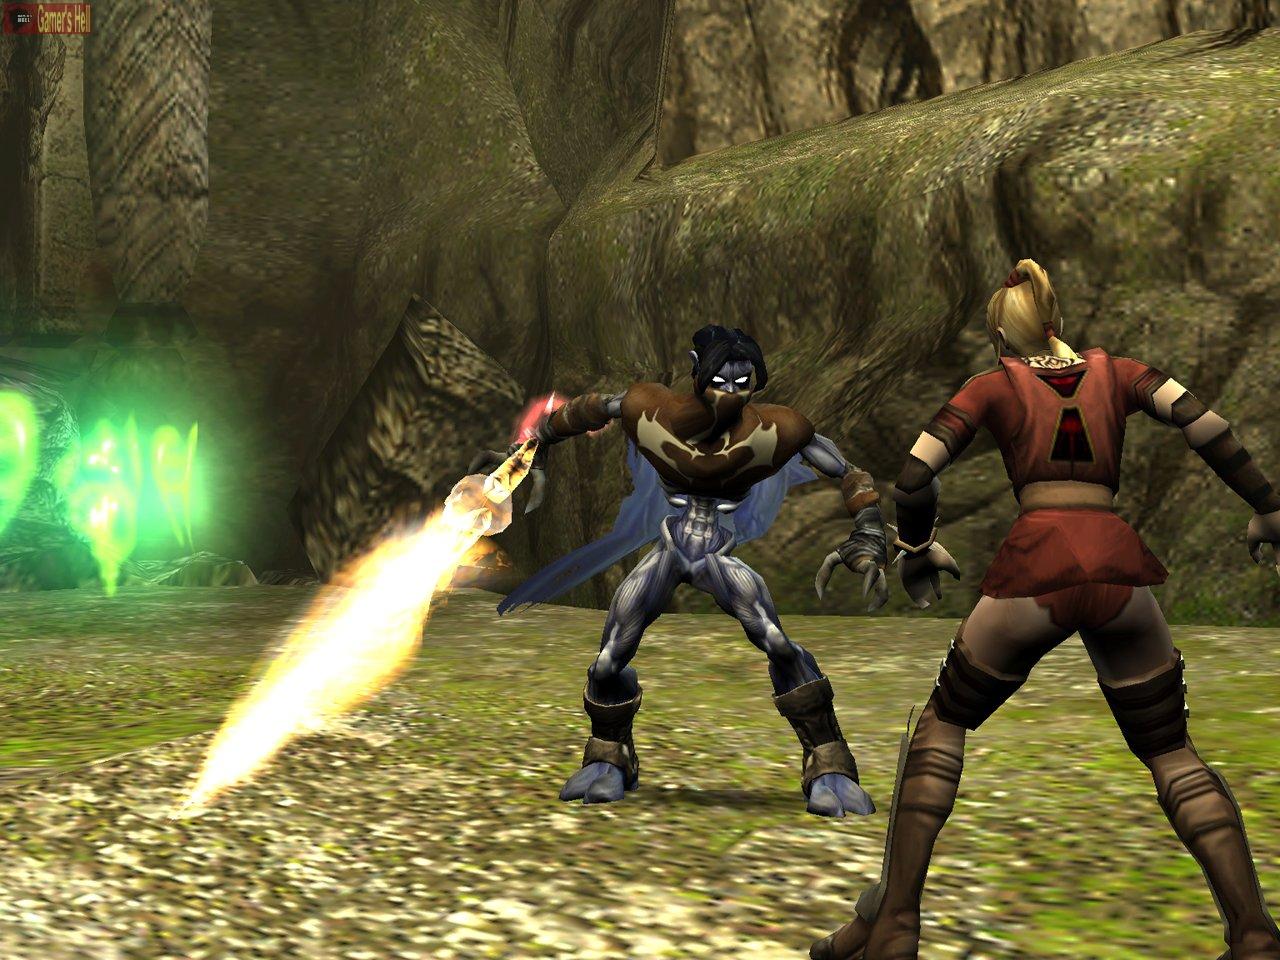 download legacy of kain defiance pc full rip pc